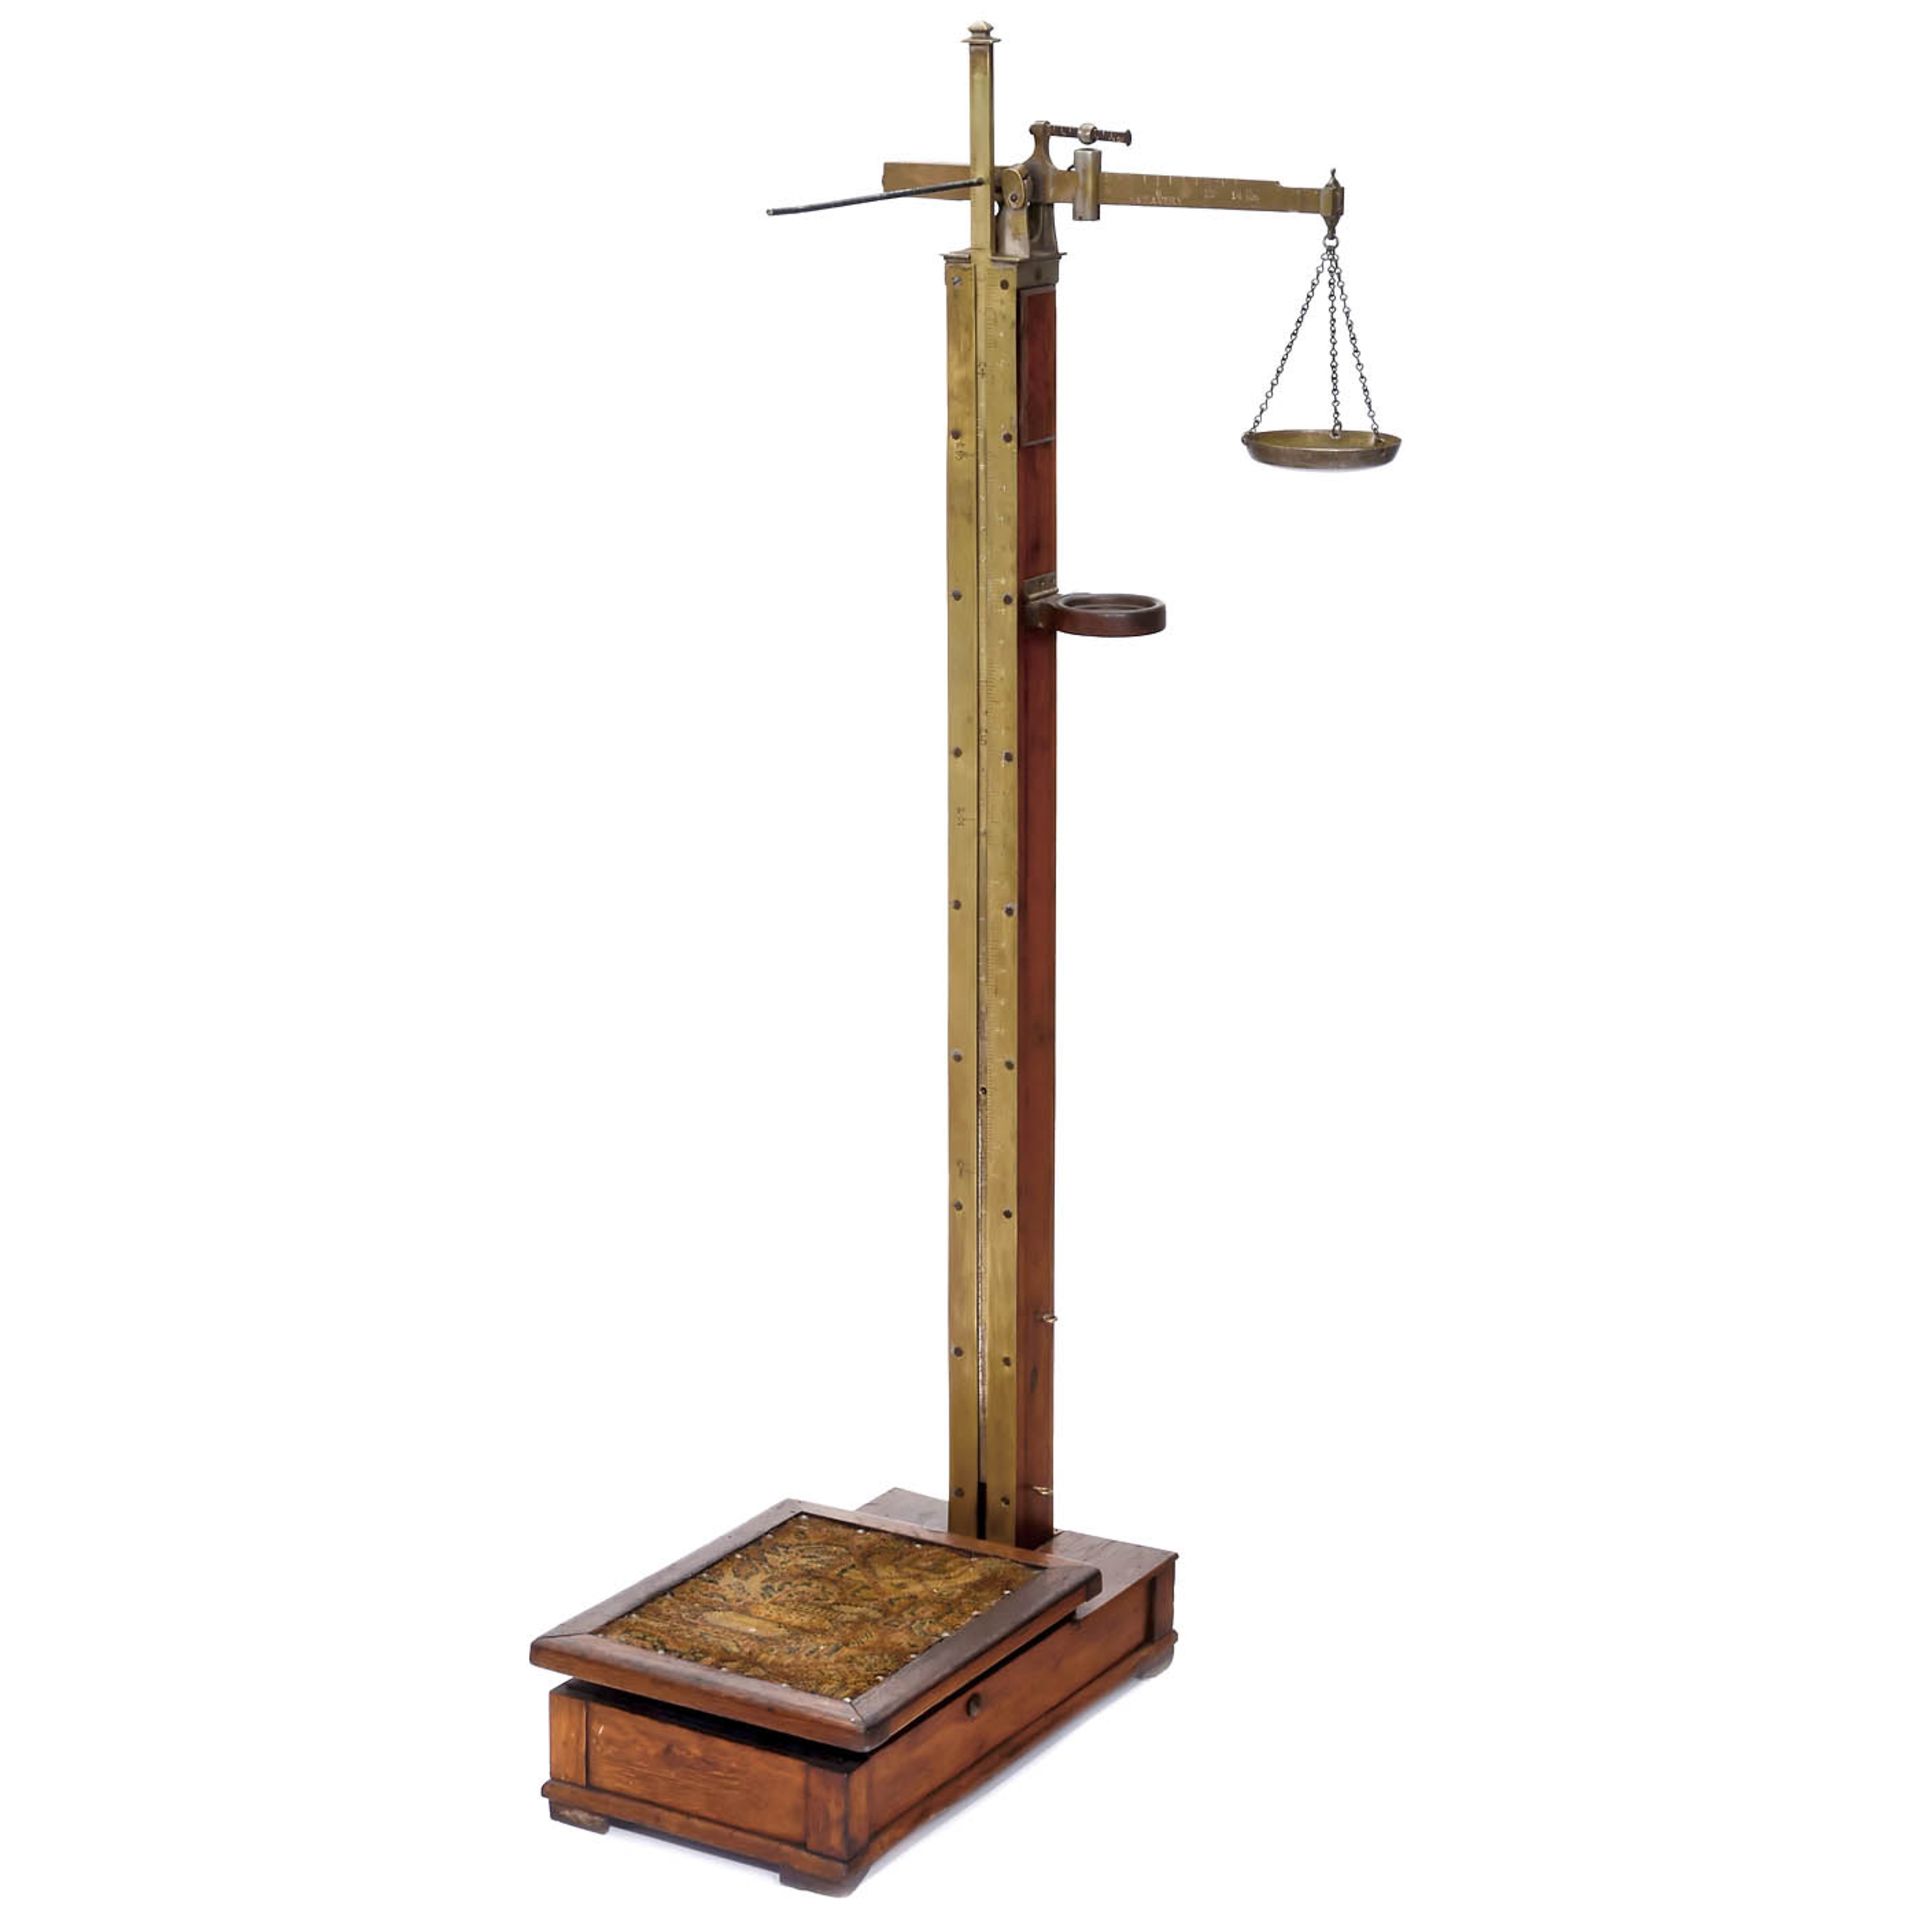 Weighing Scale by W. & T. Avery, c. 1900 - Bild 2 aus 2